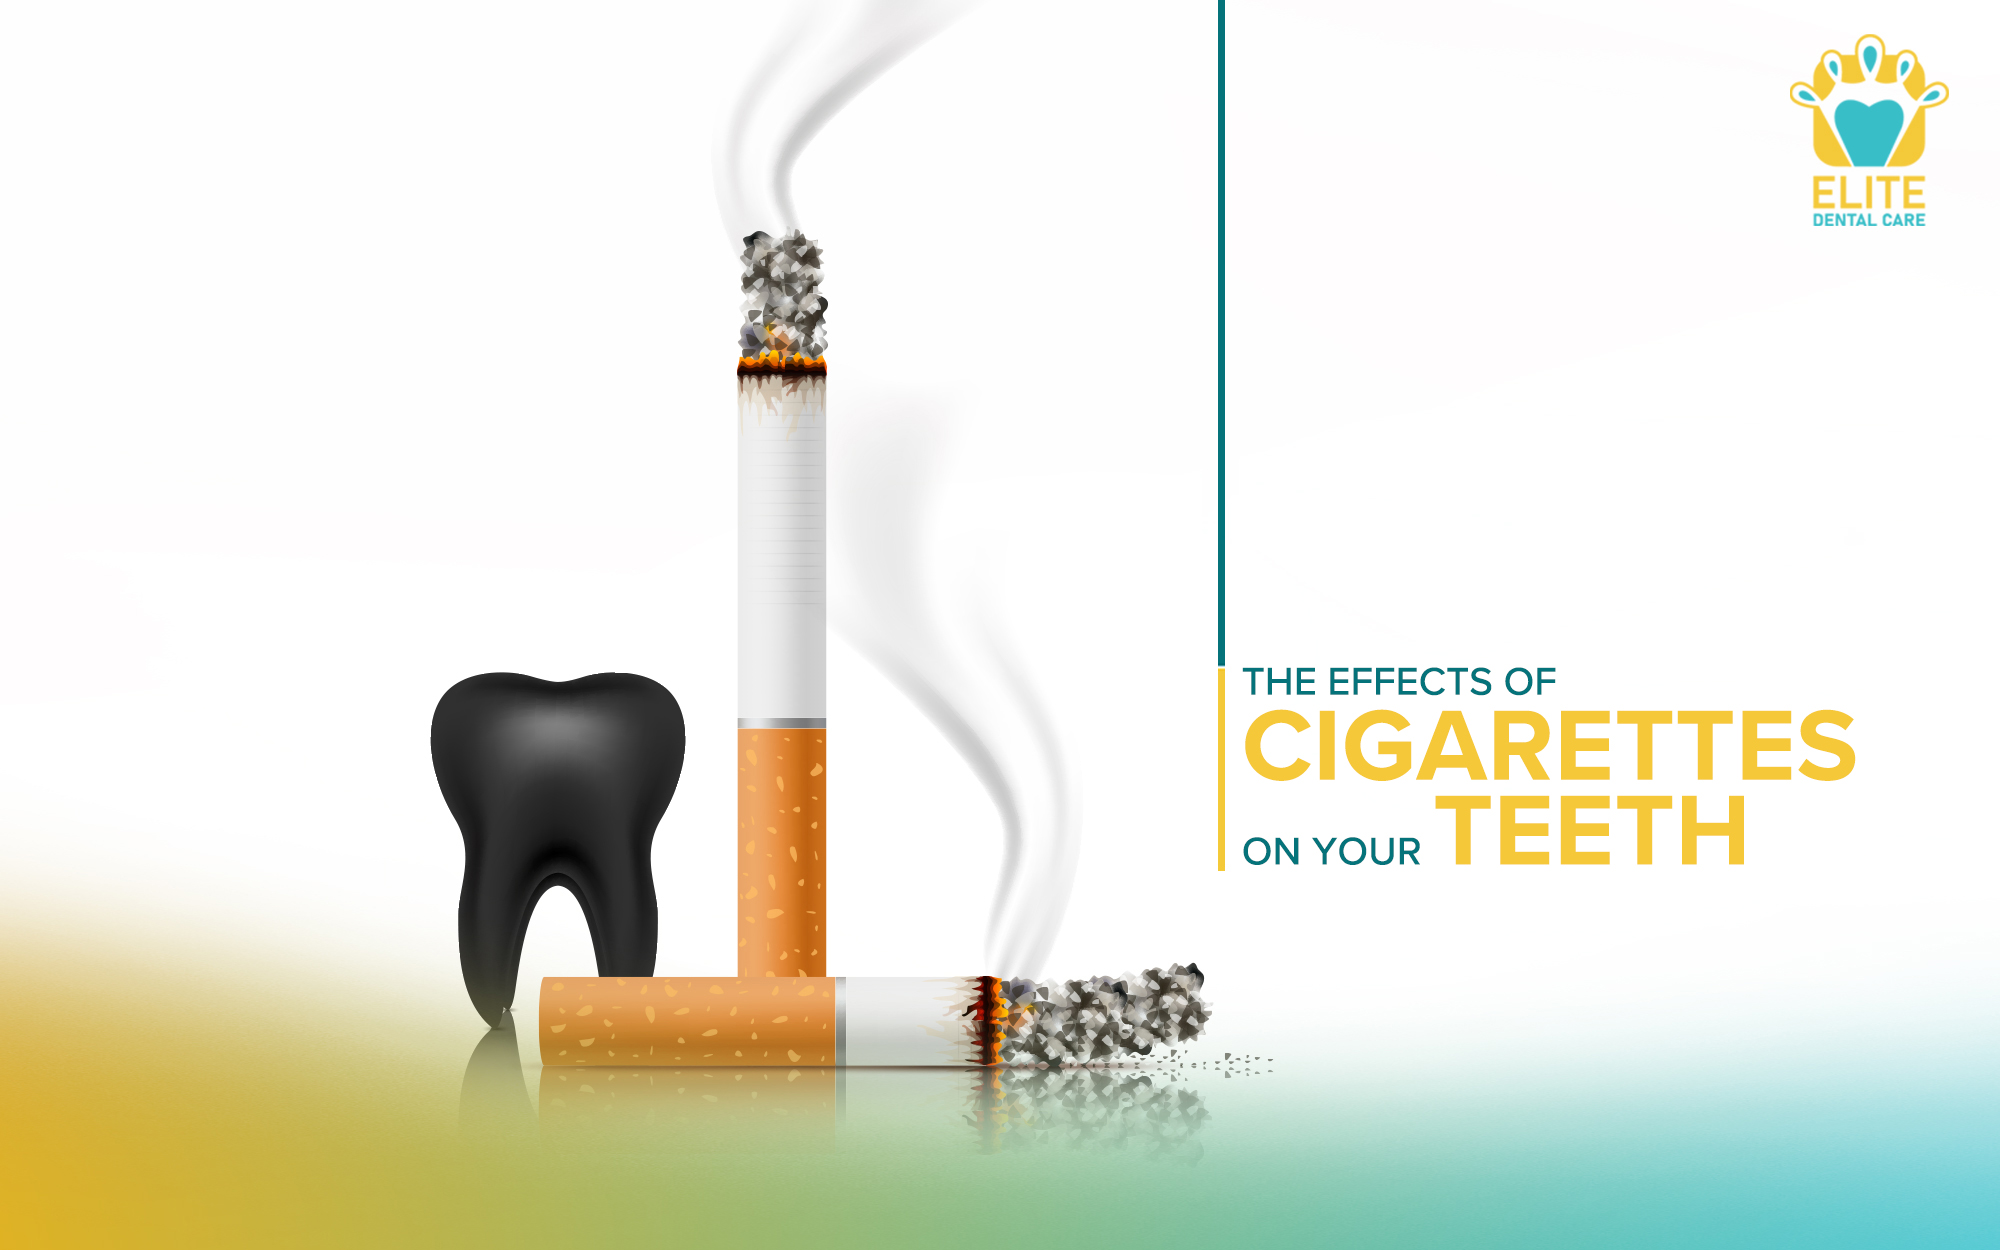 The Effects of Cigarettes on your Teeth